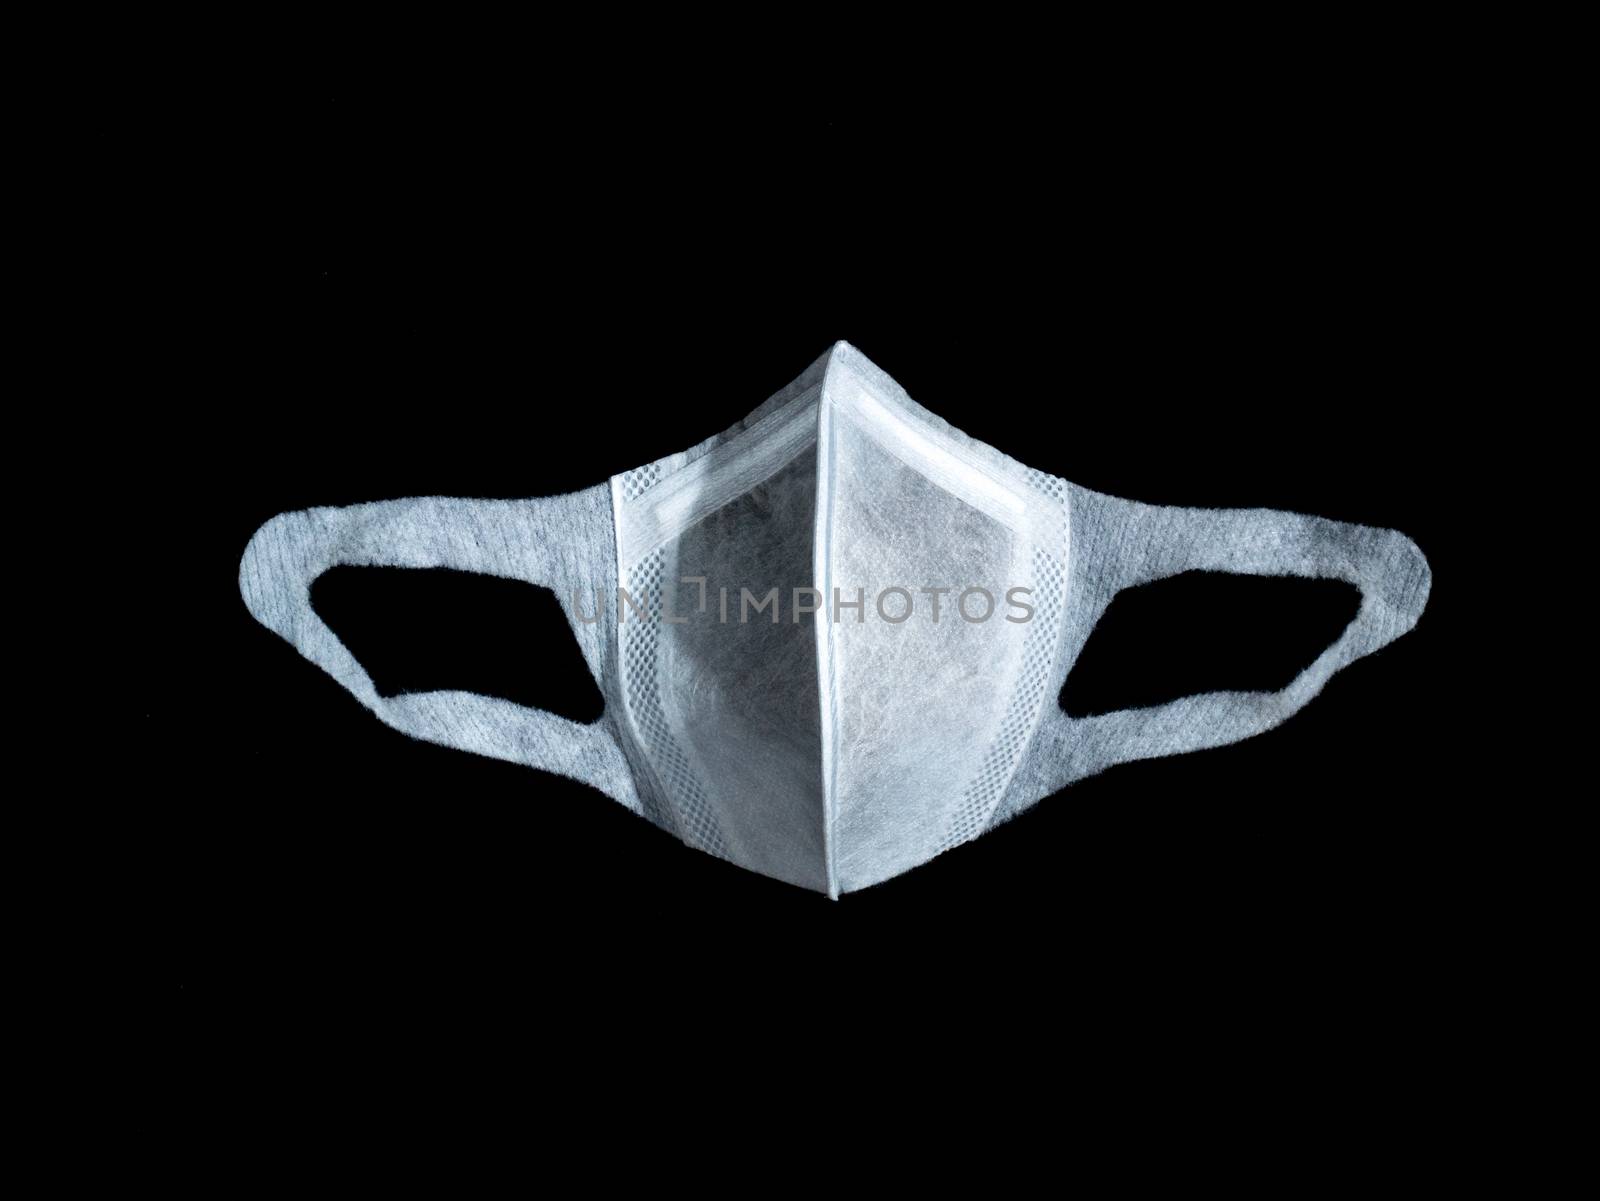 Used PM2.5 mask place on black background, discarded mask concept. Dark tone.